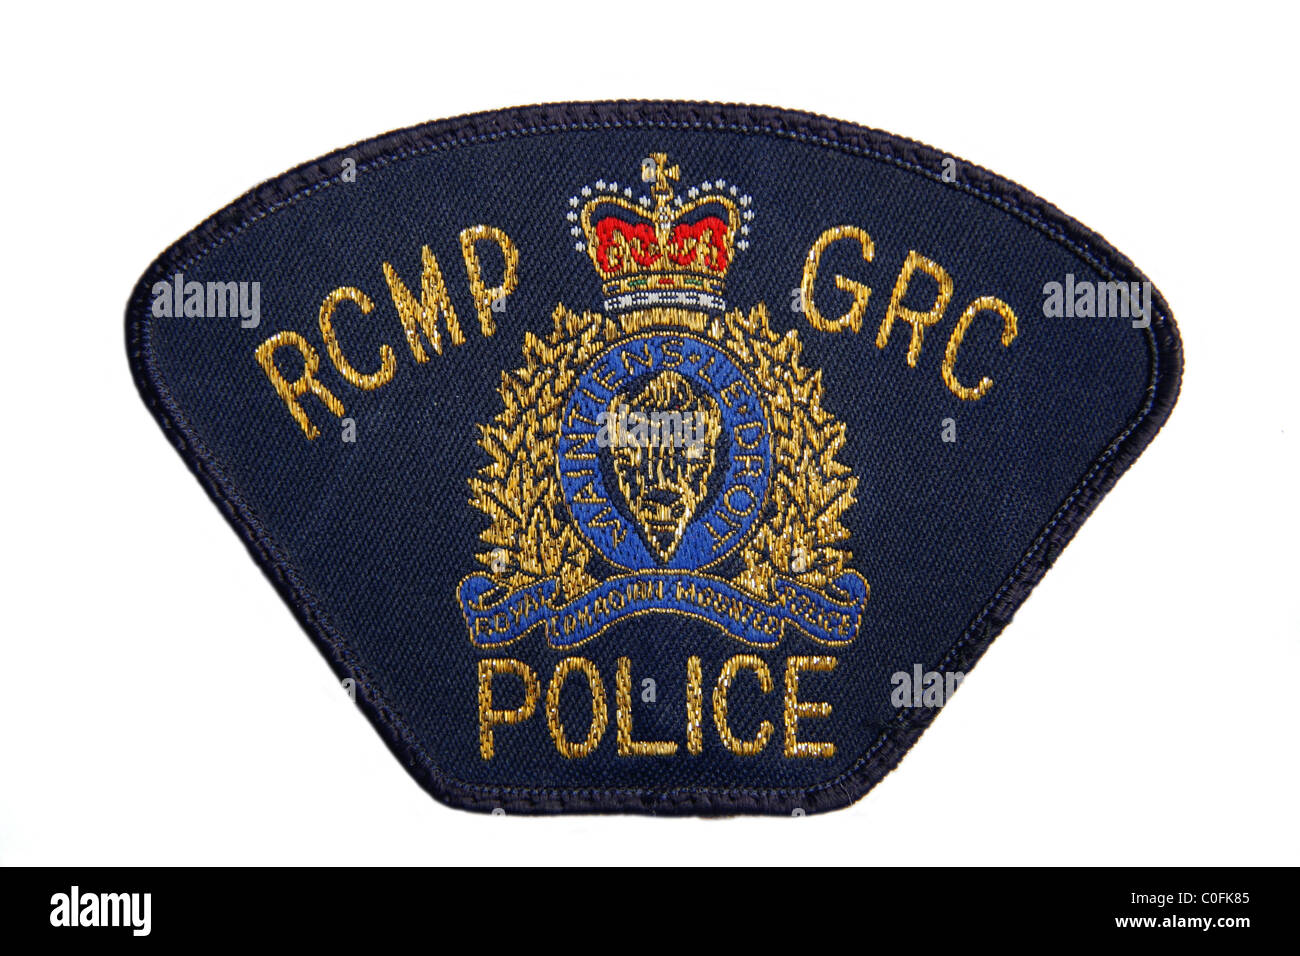   Royal Canadian Mounted Police RCMP  Police Shoulder Patches Post 2.00 Six 